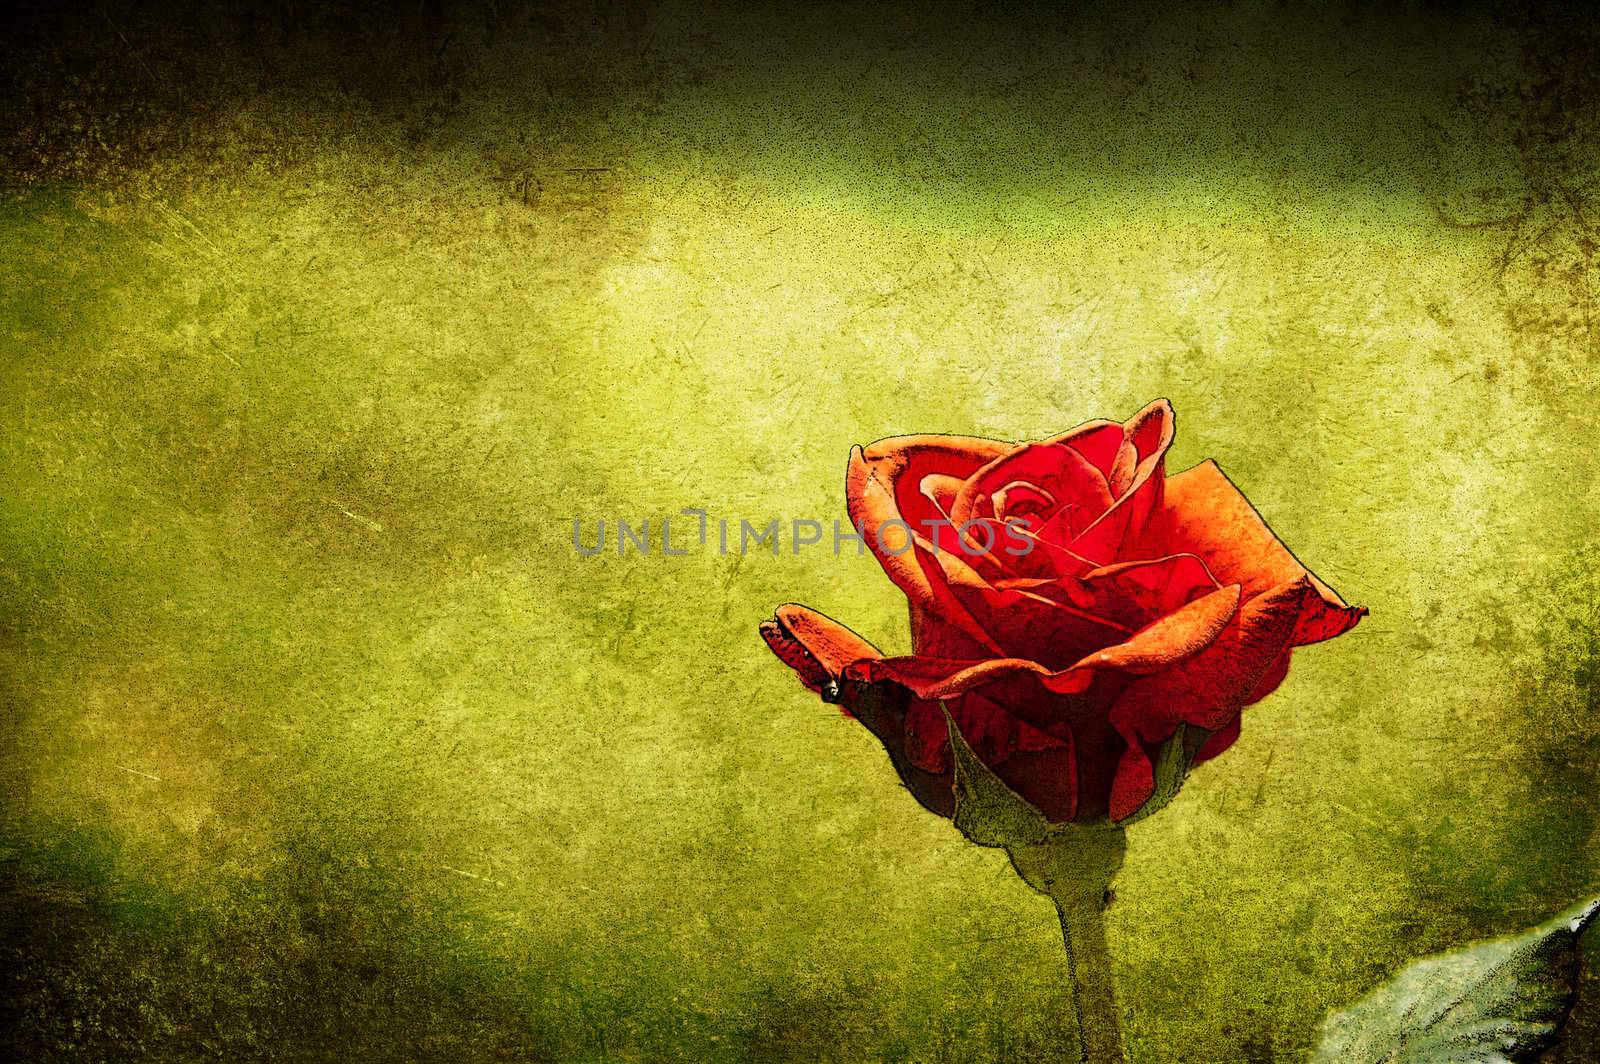 A red rose aged in a green grunge background